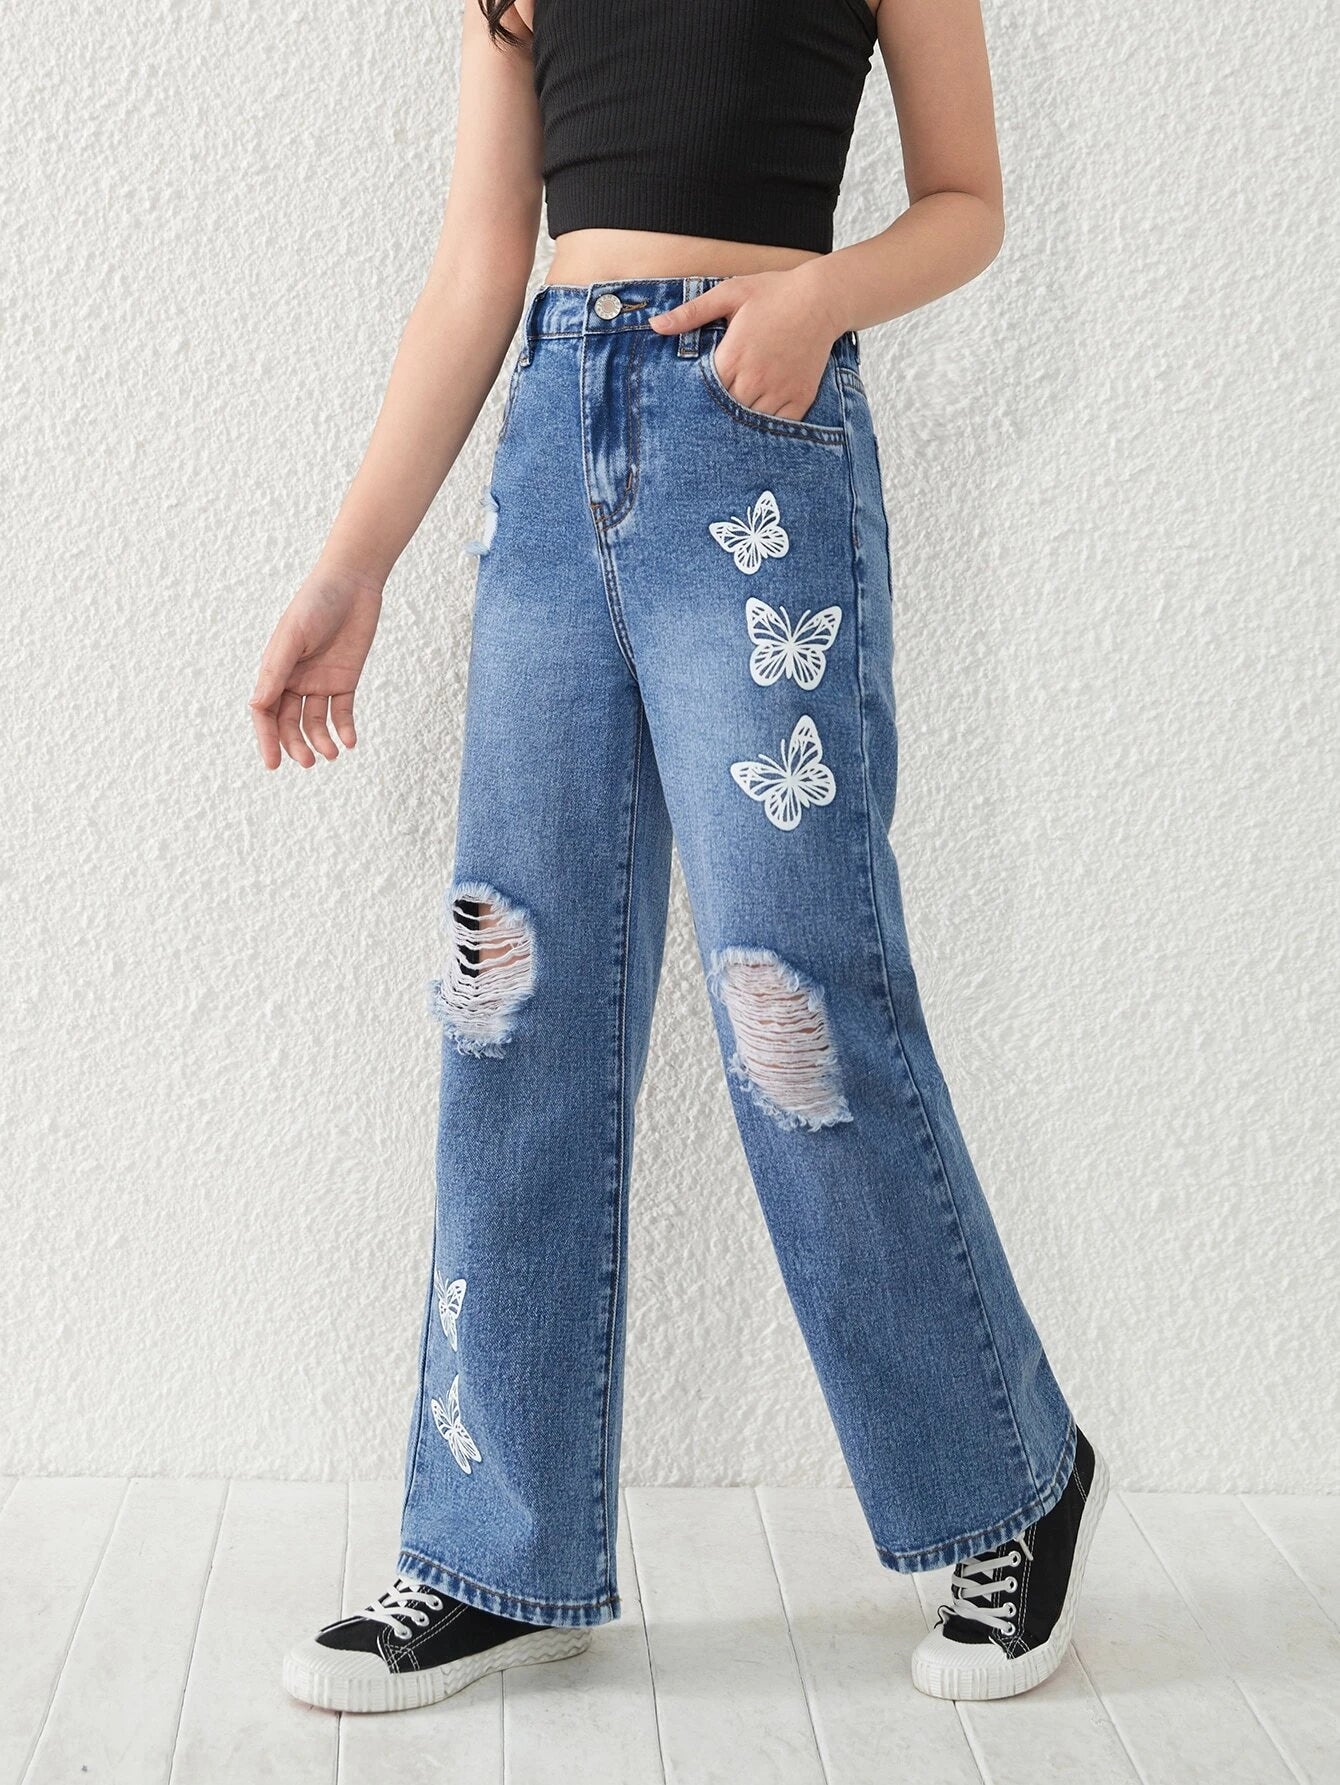 Girls Butterfly Print Ripped Straight Leg Jeans